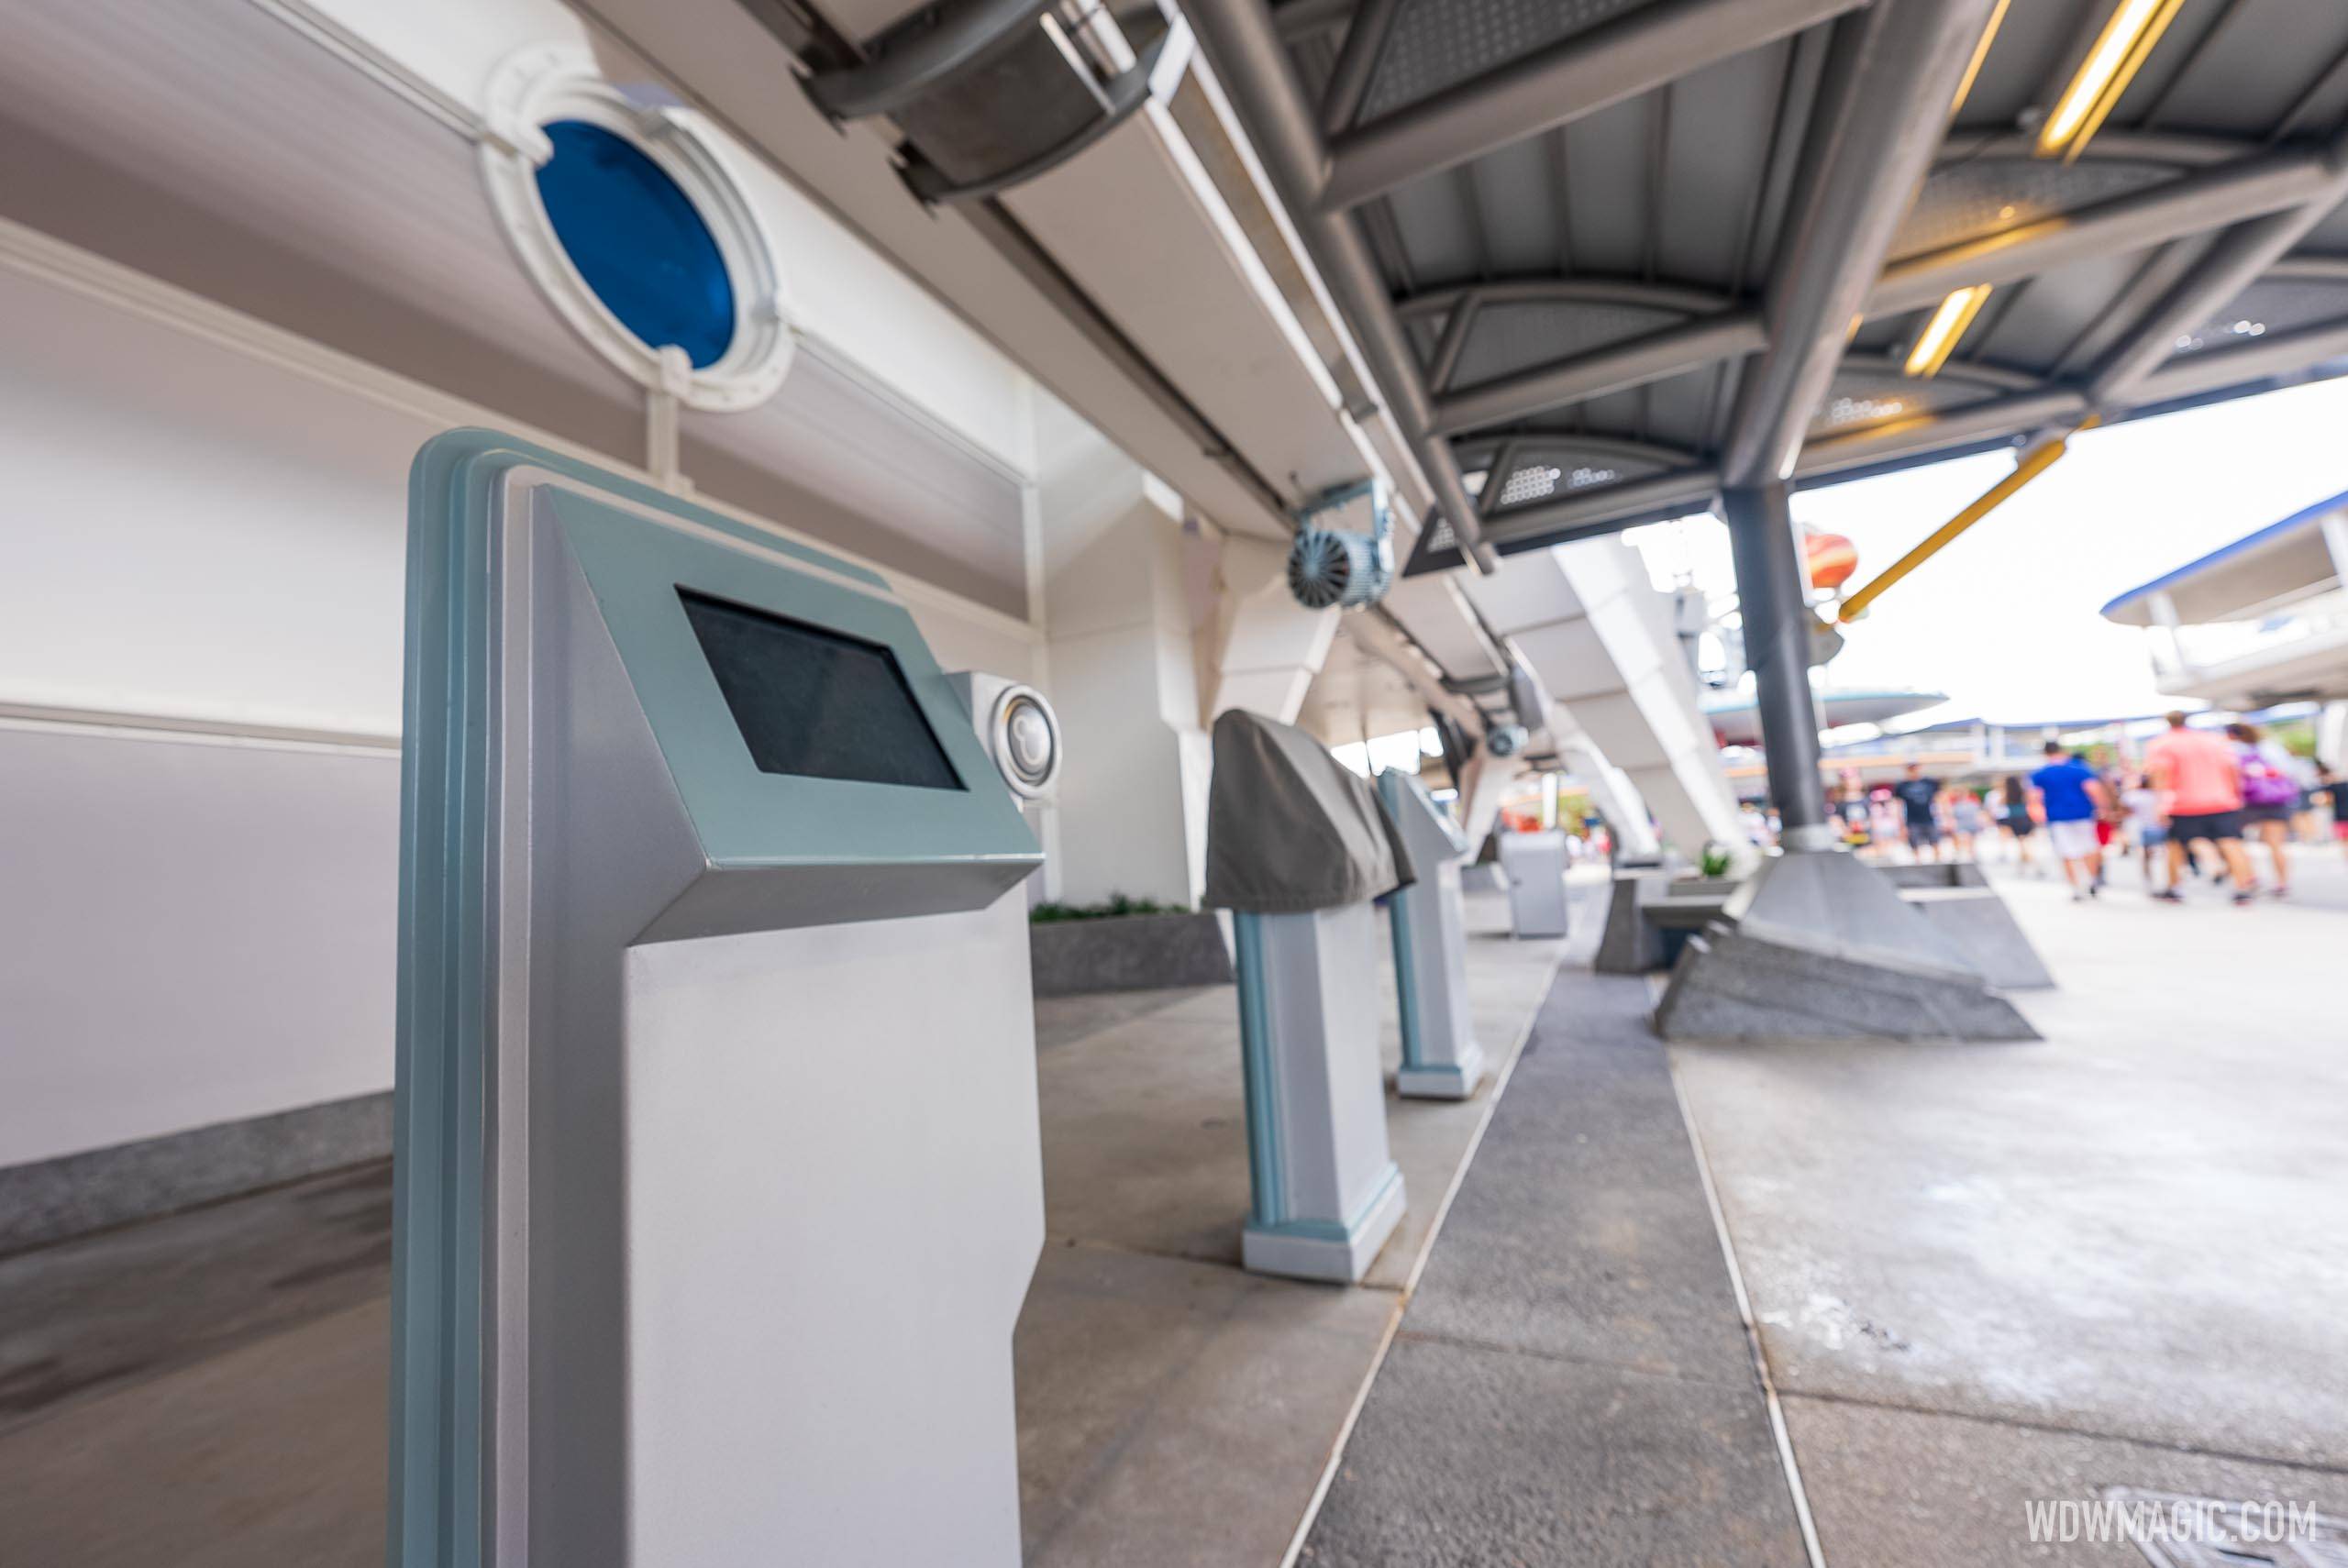 Former FastPass+ kiosks continue to be uncovered at Magic Kingdom as interest surrounds the possibility of a paid FastPass offering